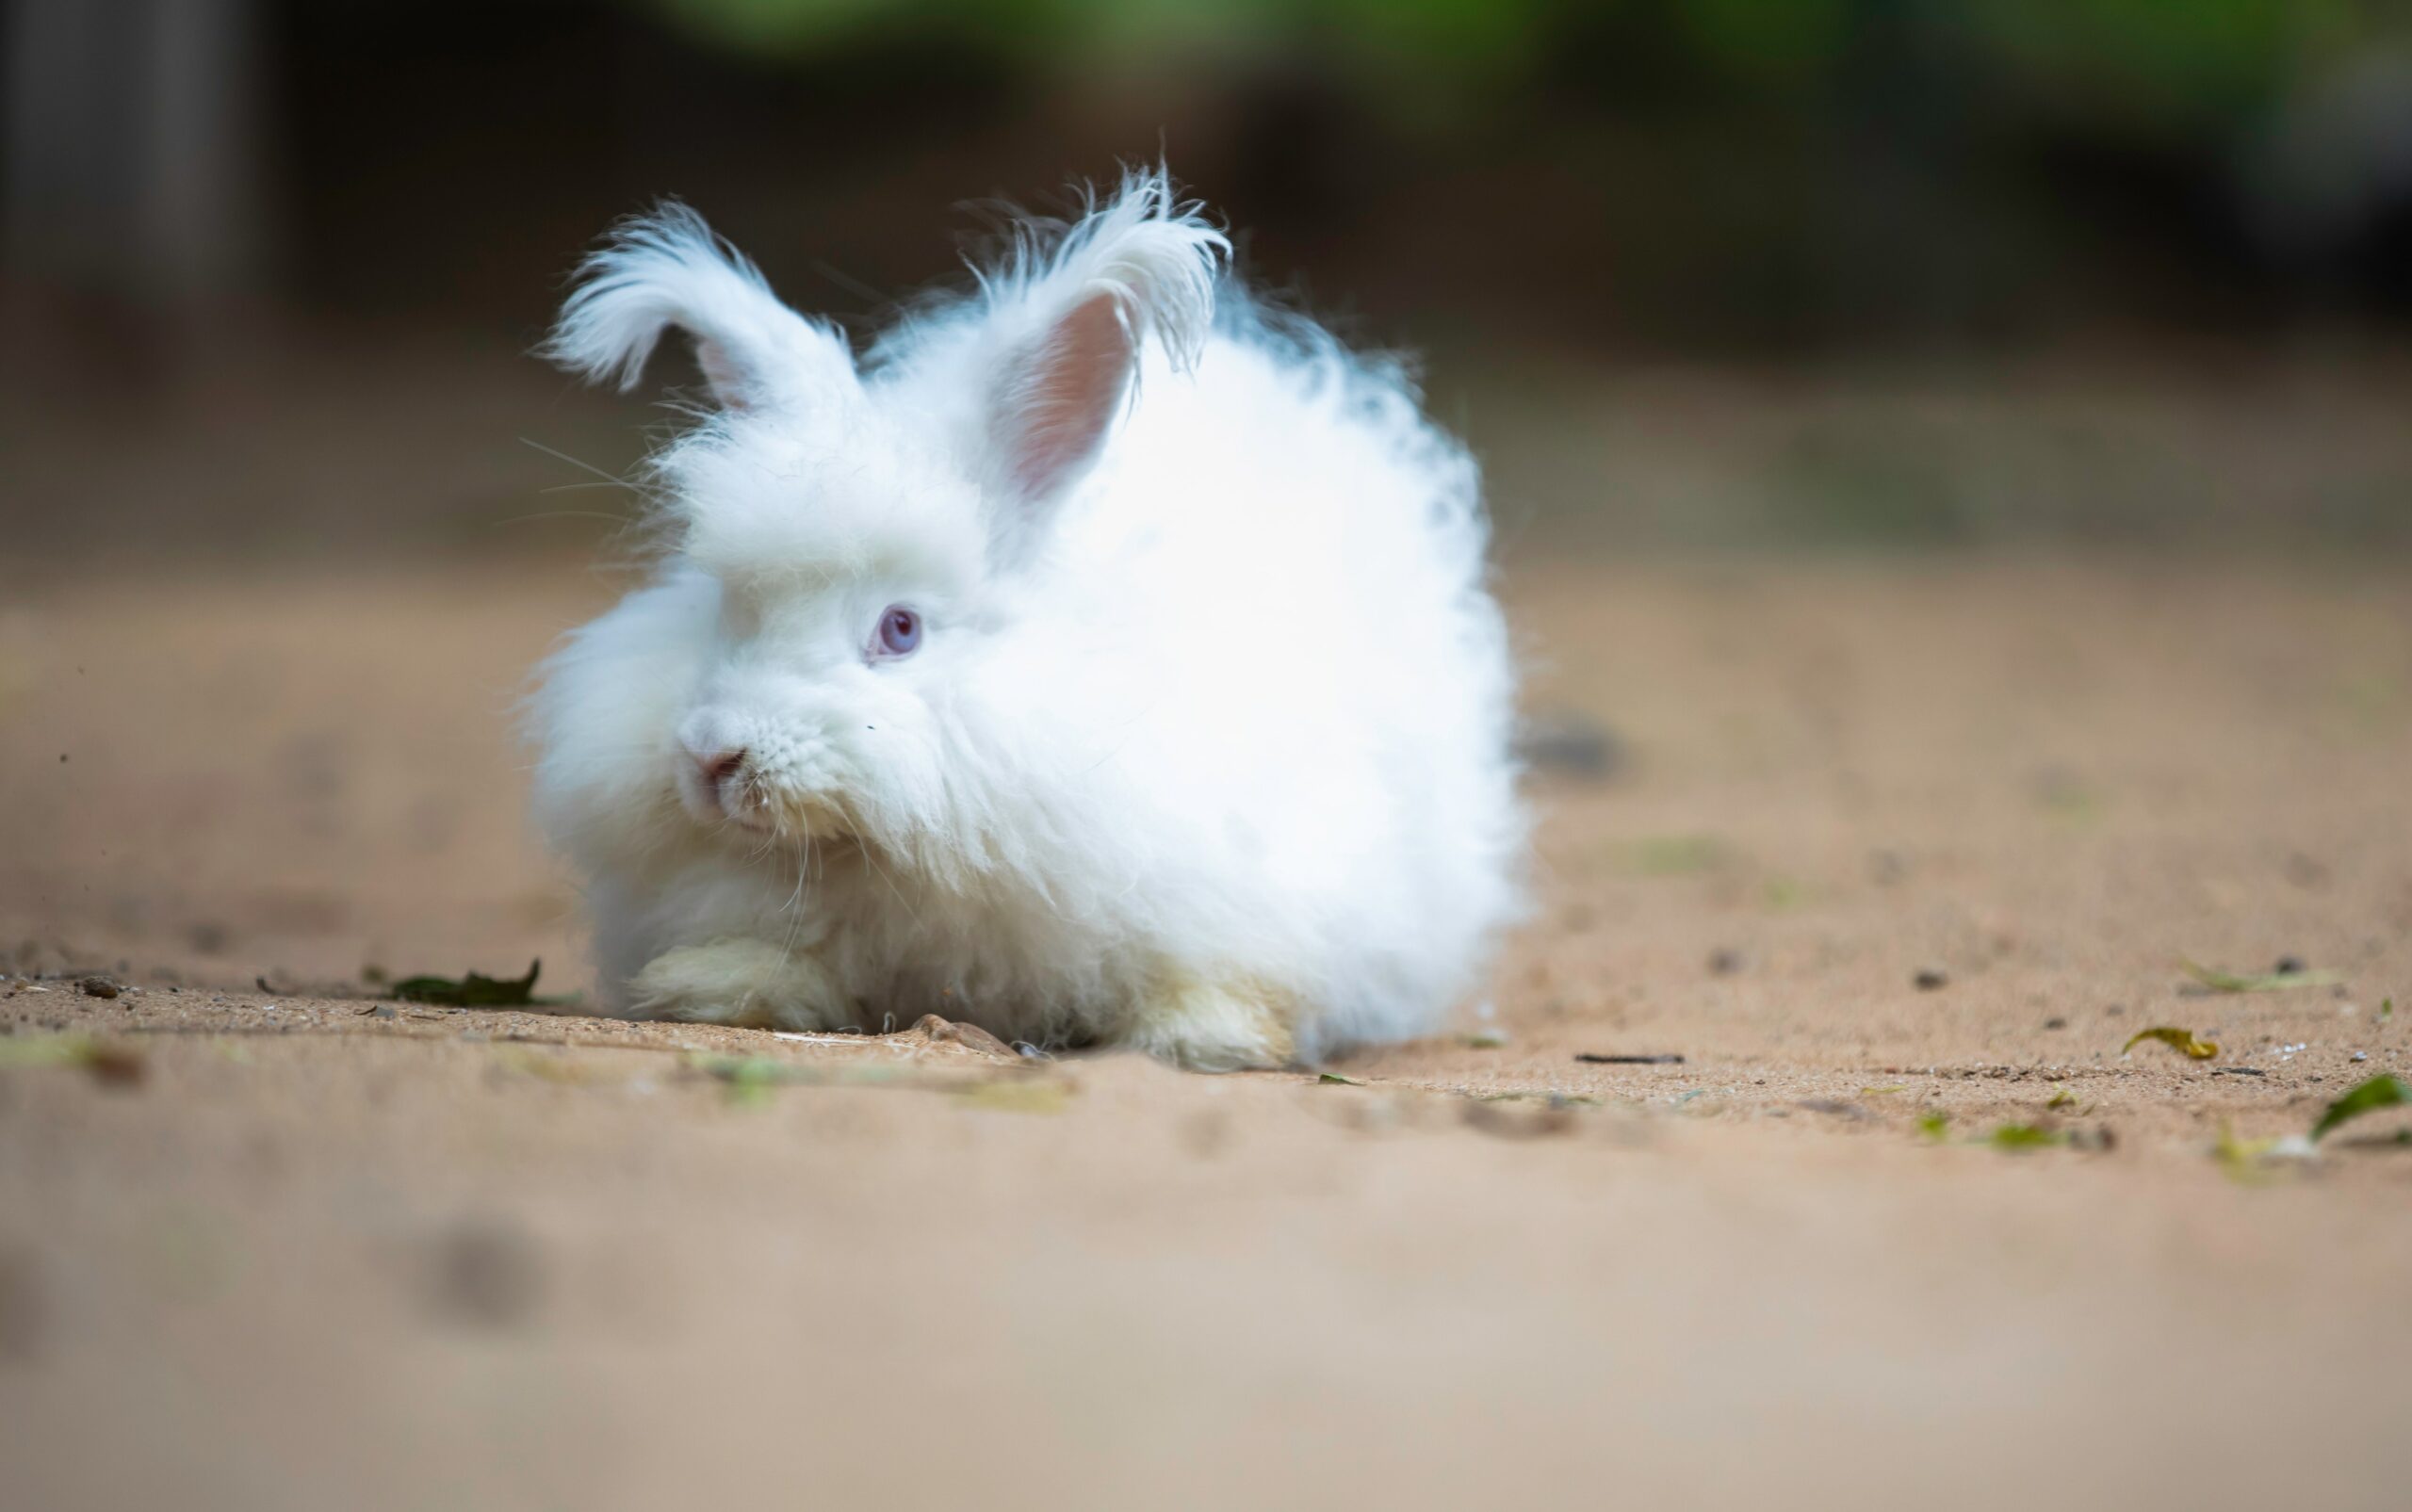 lionhead rabbits are prone to certain health issues